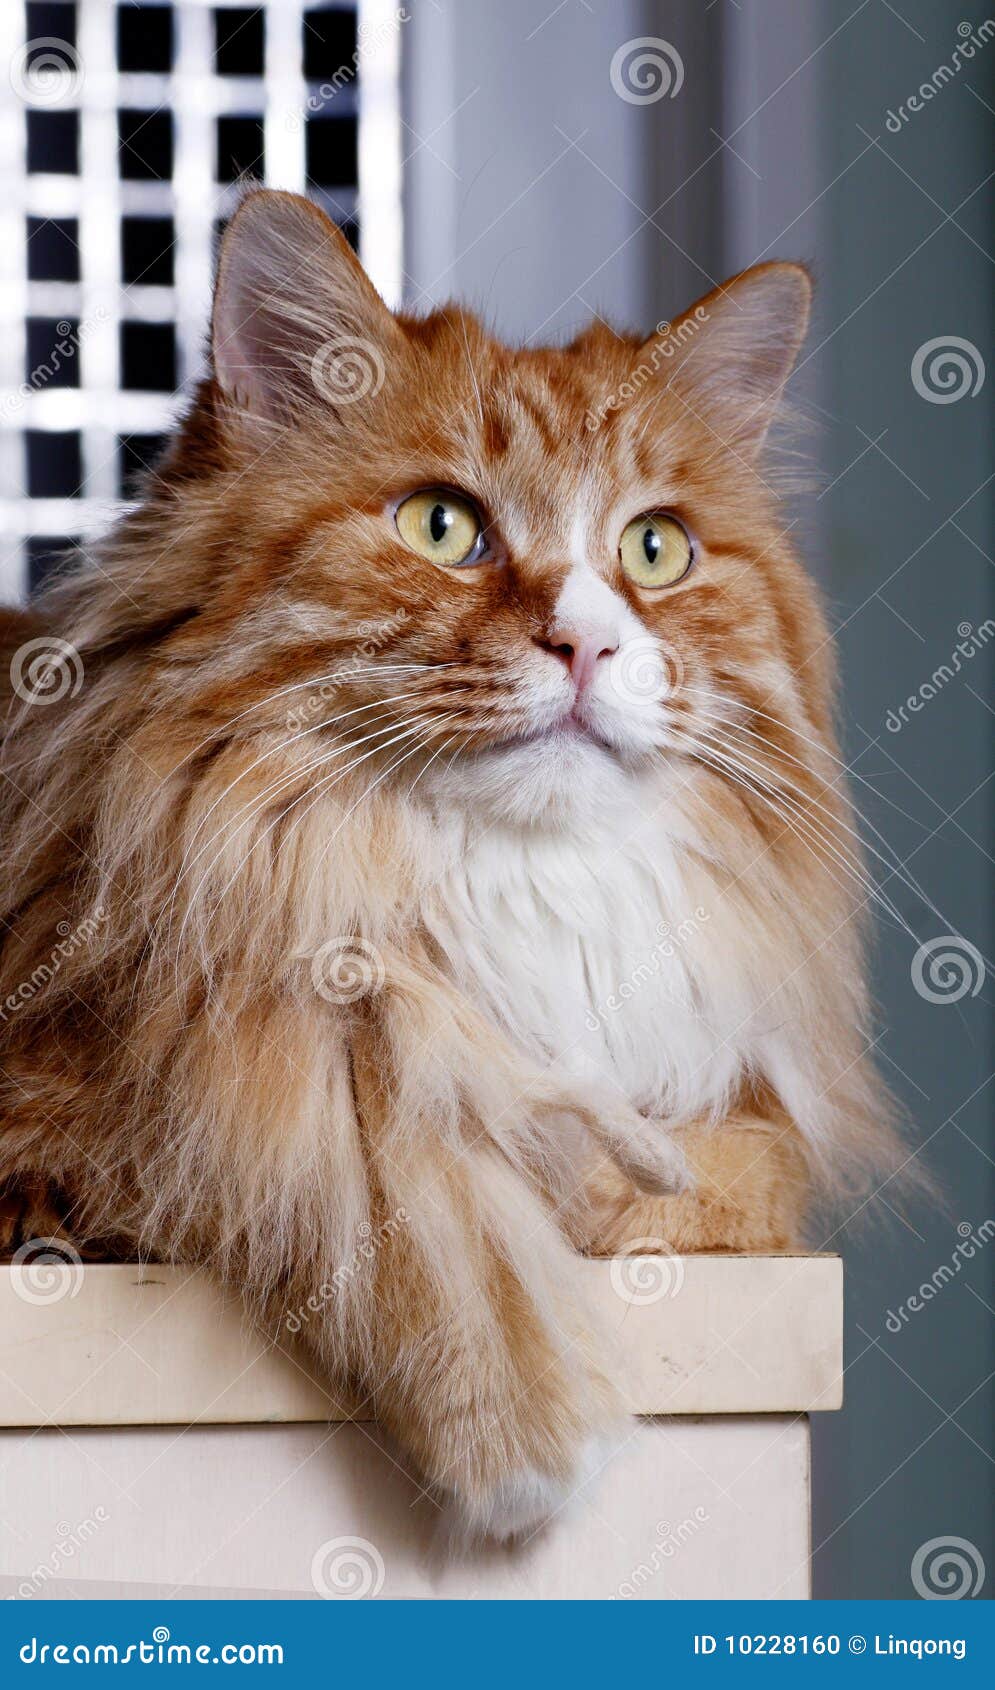 Cute yellow cat stock photo. Image of looking, cats, animal - 10228160